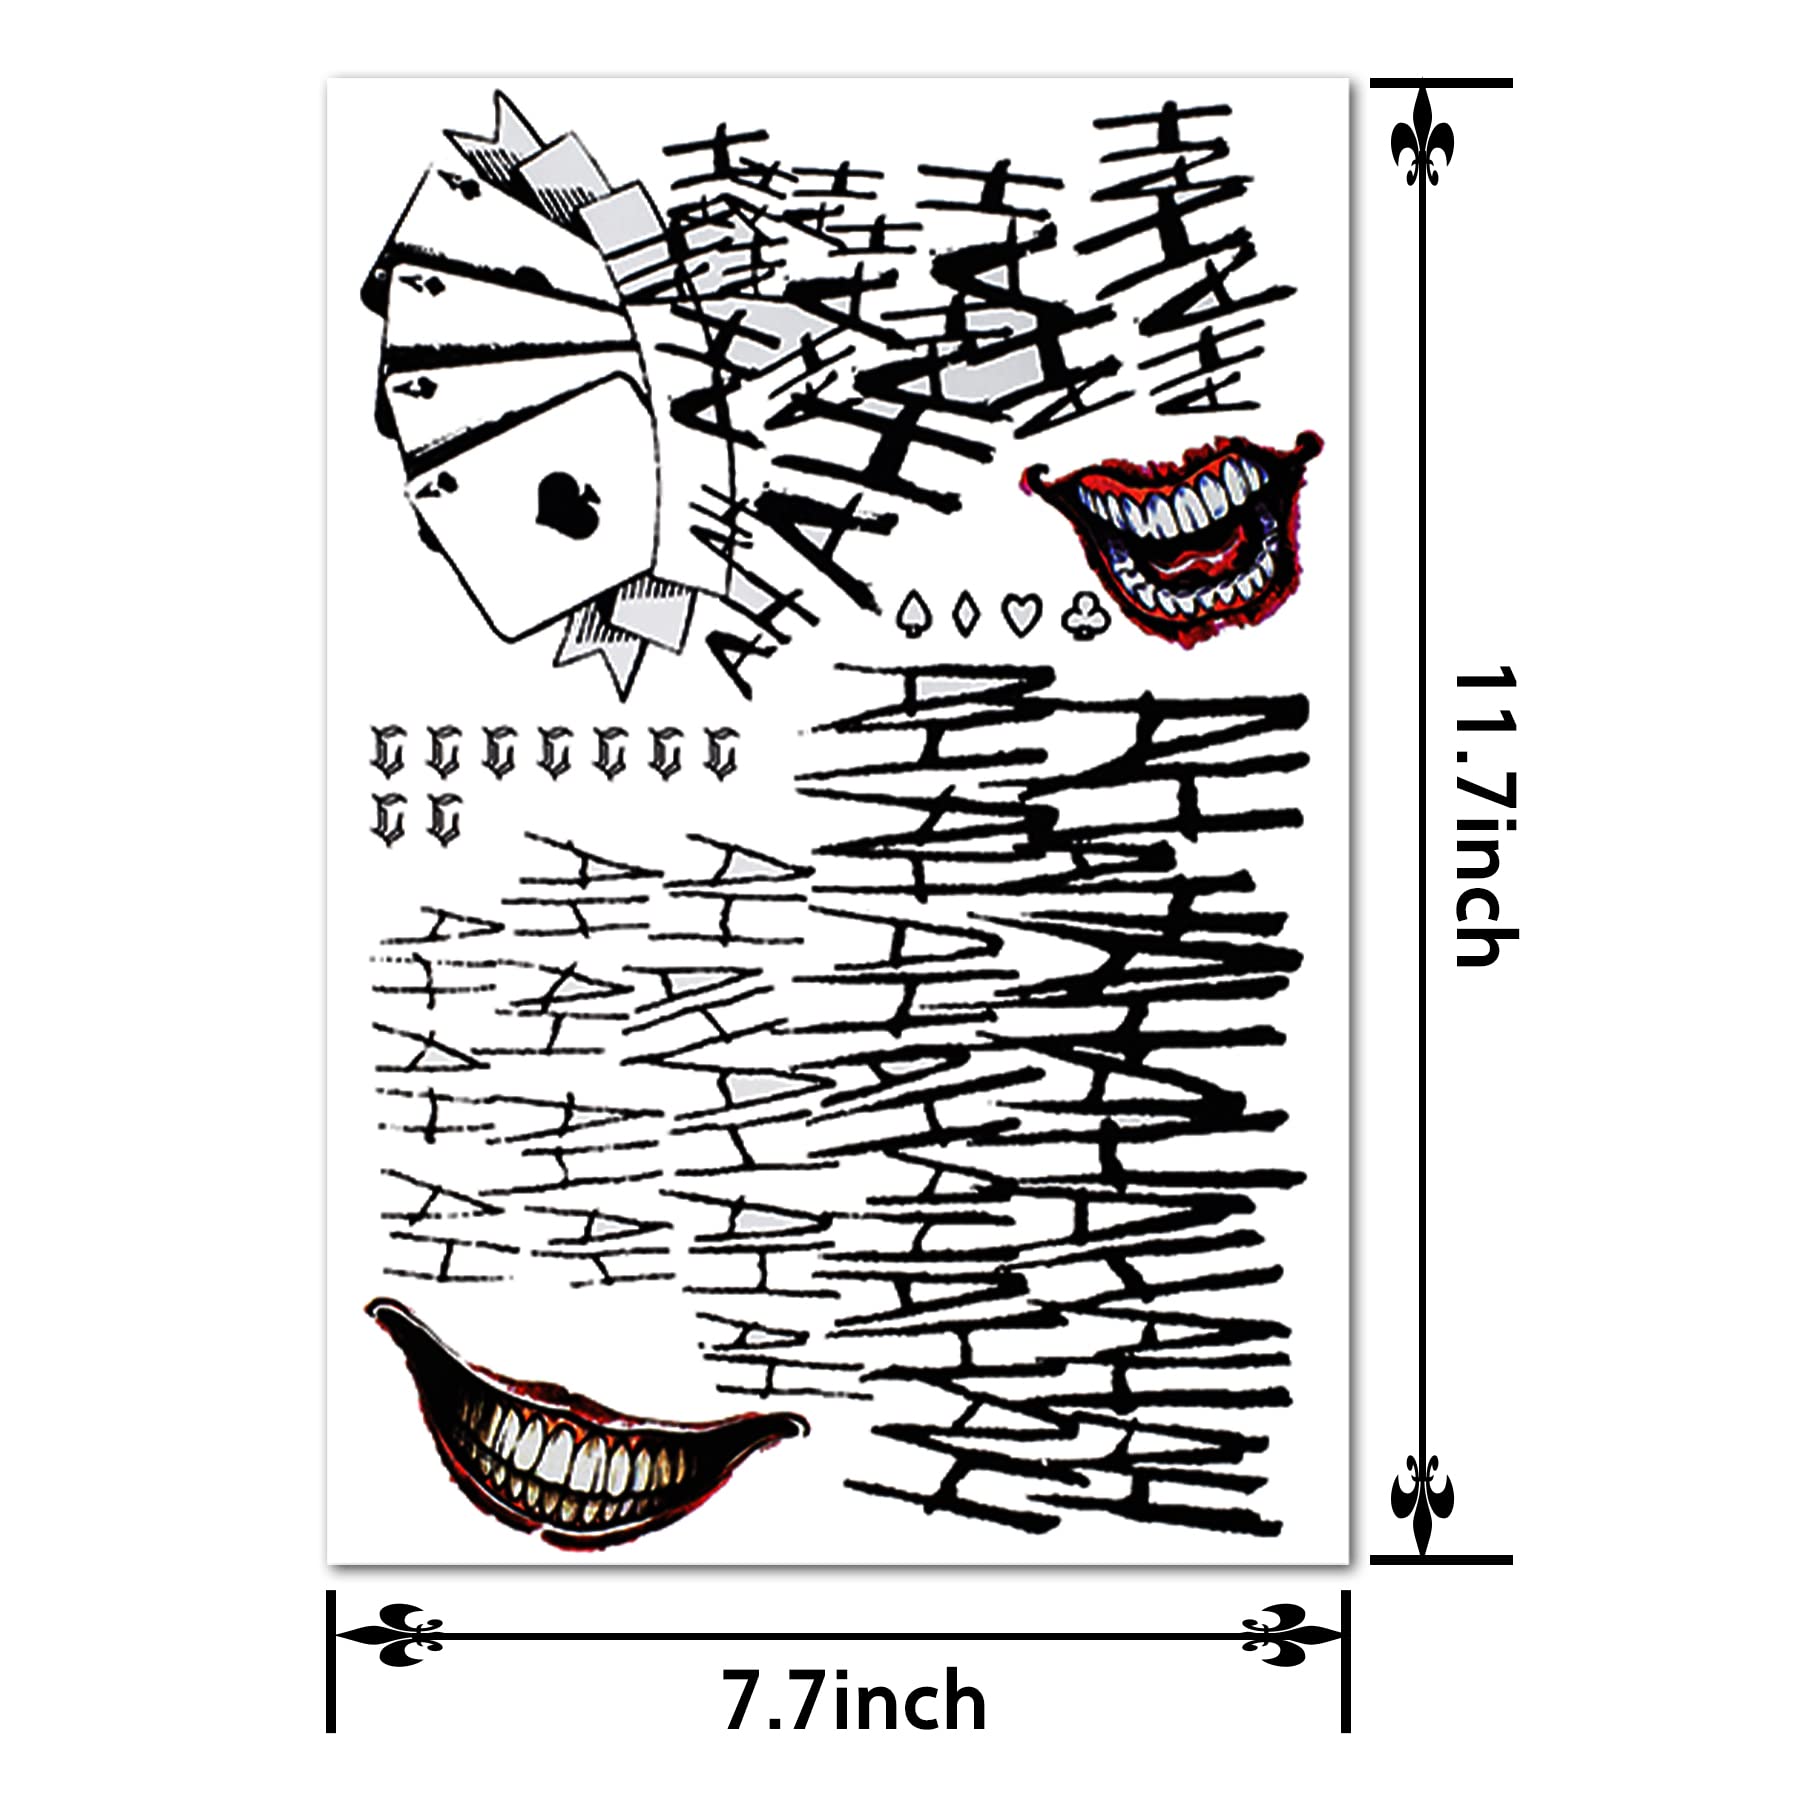 3 Sheets Joker Tattoos, Realistic & Last Long Halloween Fake Temporary Tattoo Sticker for Men - All Versions - Perfect for Halloween Cosplay Costumes Masquerade Party Makeup Accessories